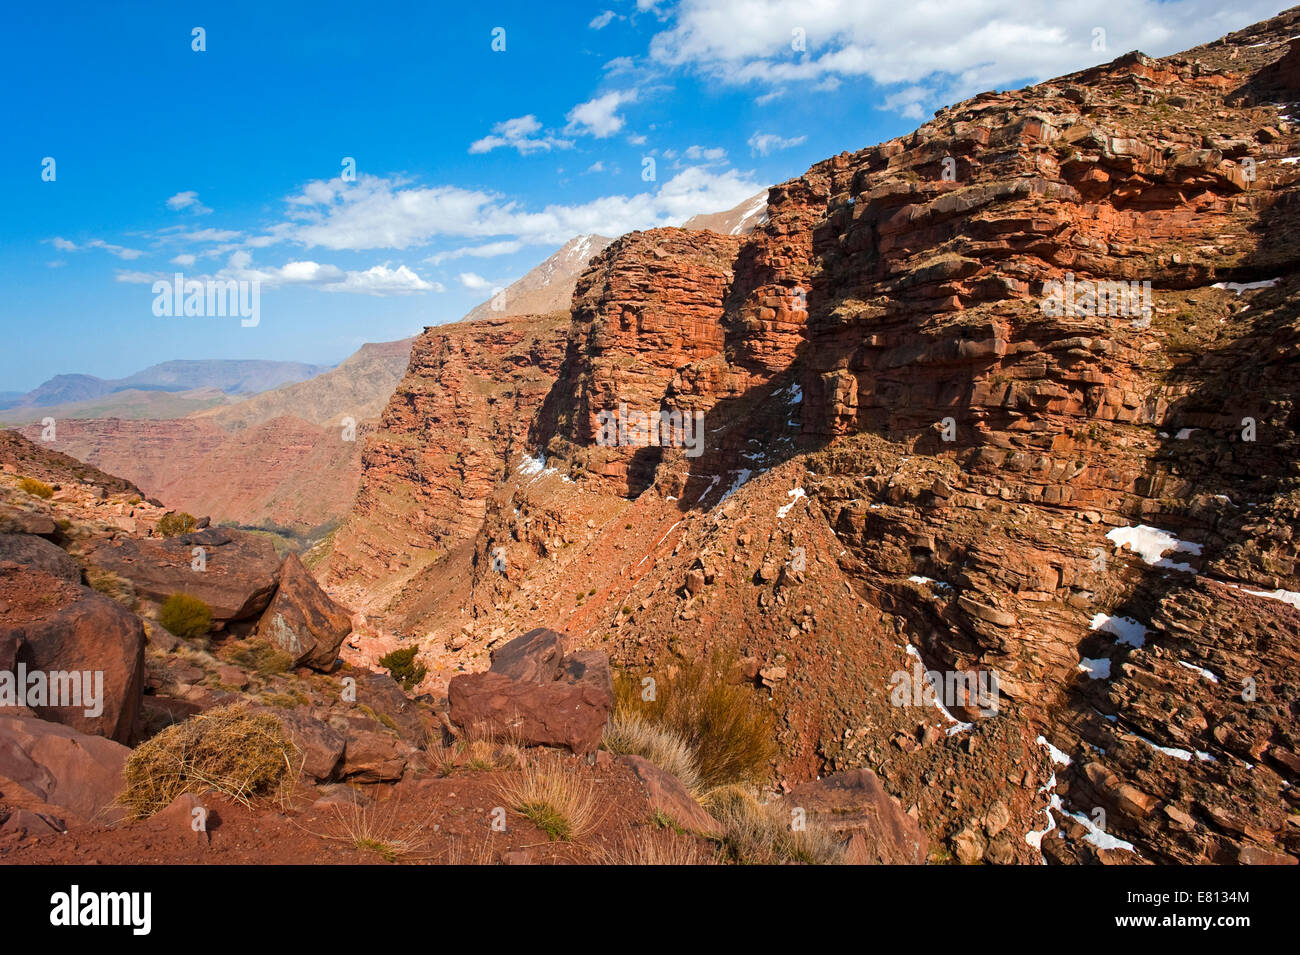 Horizontal view of the red sandstones cliffs in the High Atlas Mountain range in Morocco. Stock Photo